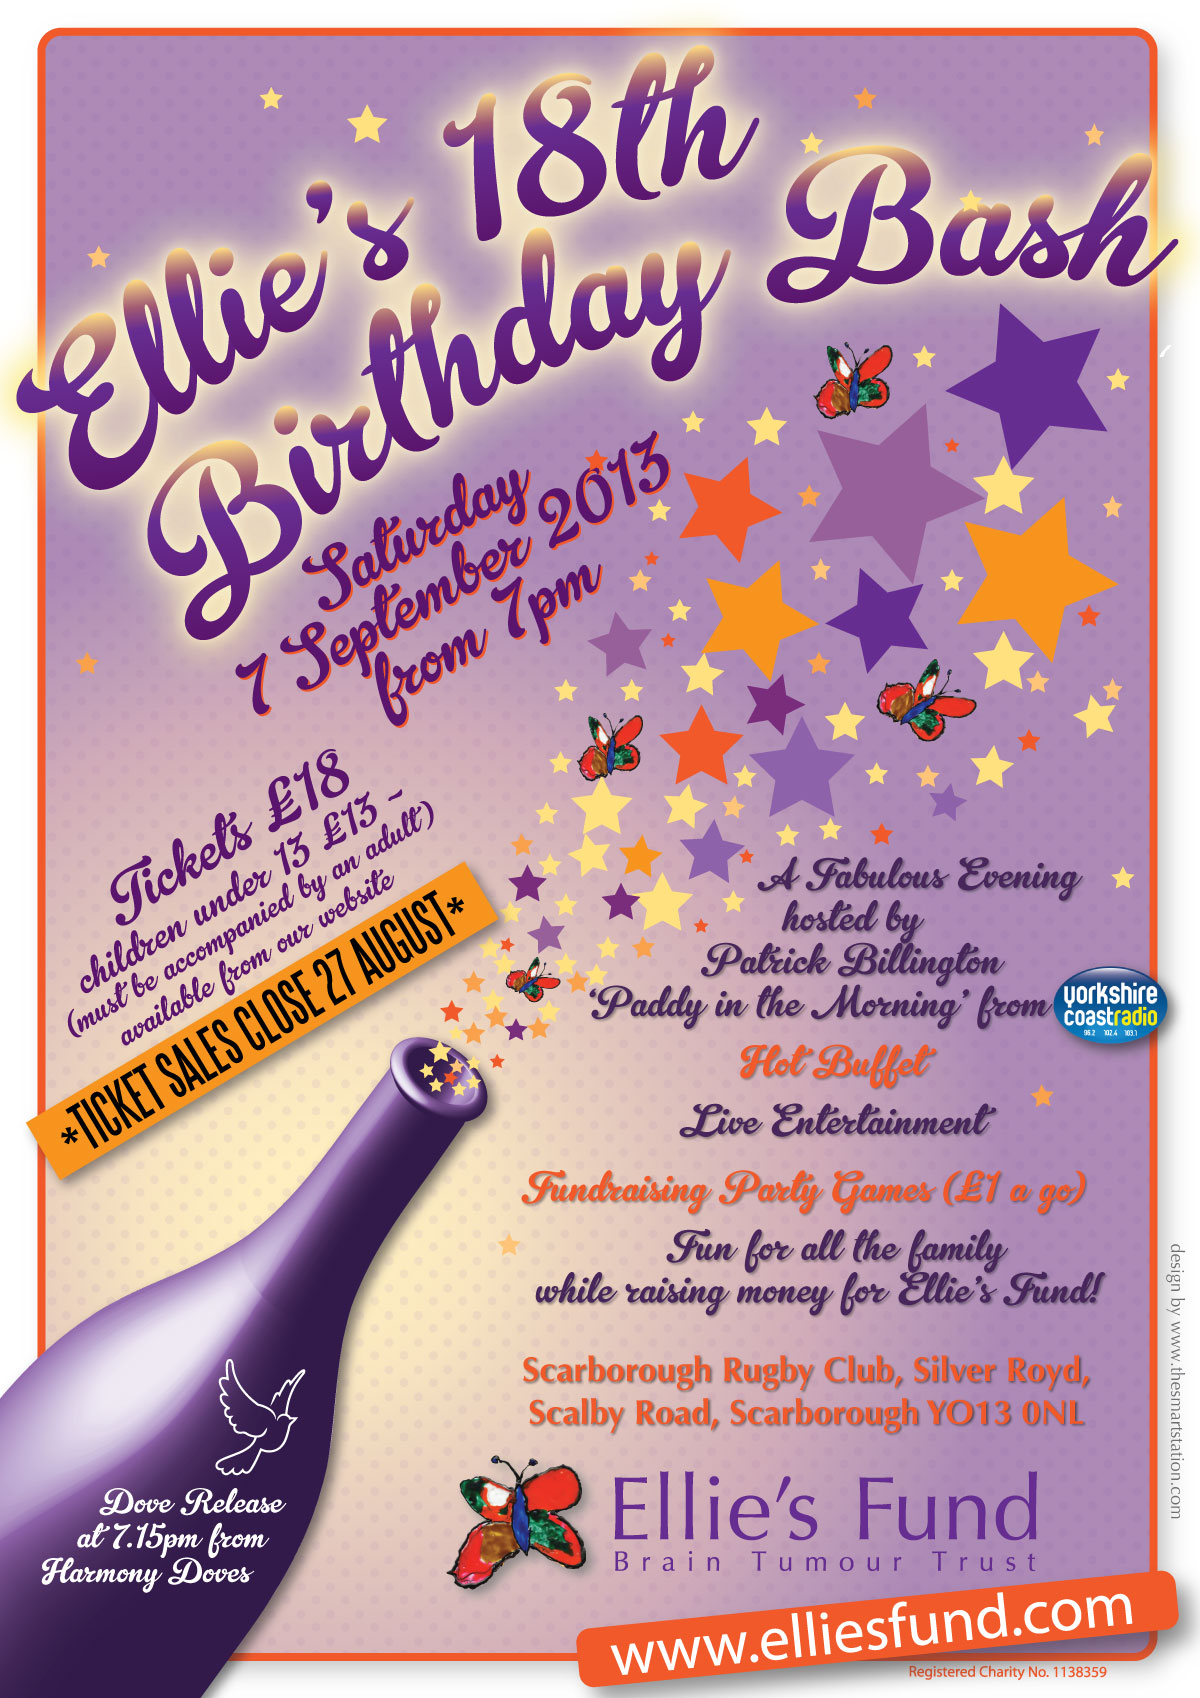 Ellie's Fund 18th Birthday poster designed by Gaynor Carr at The Smart Station